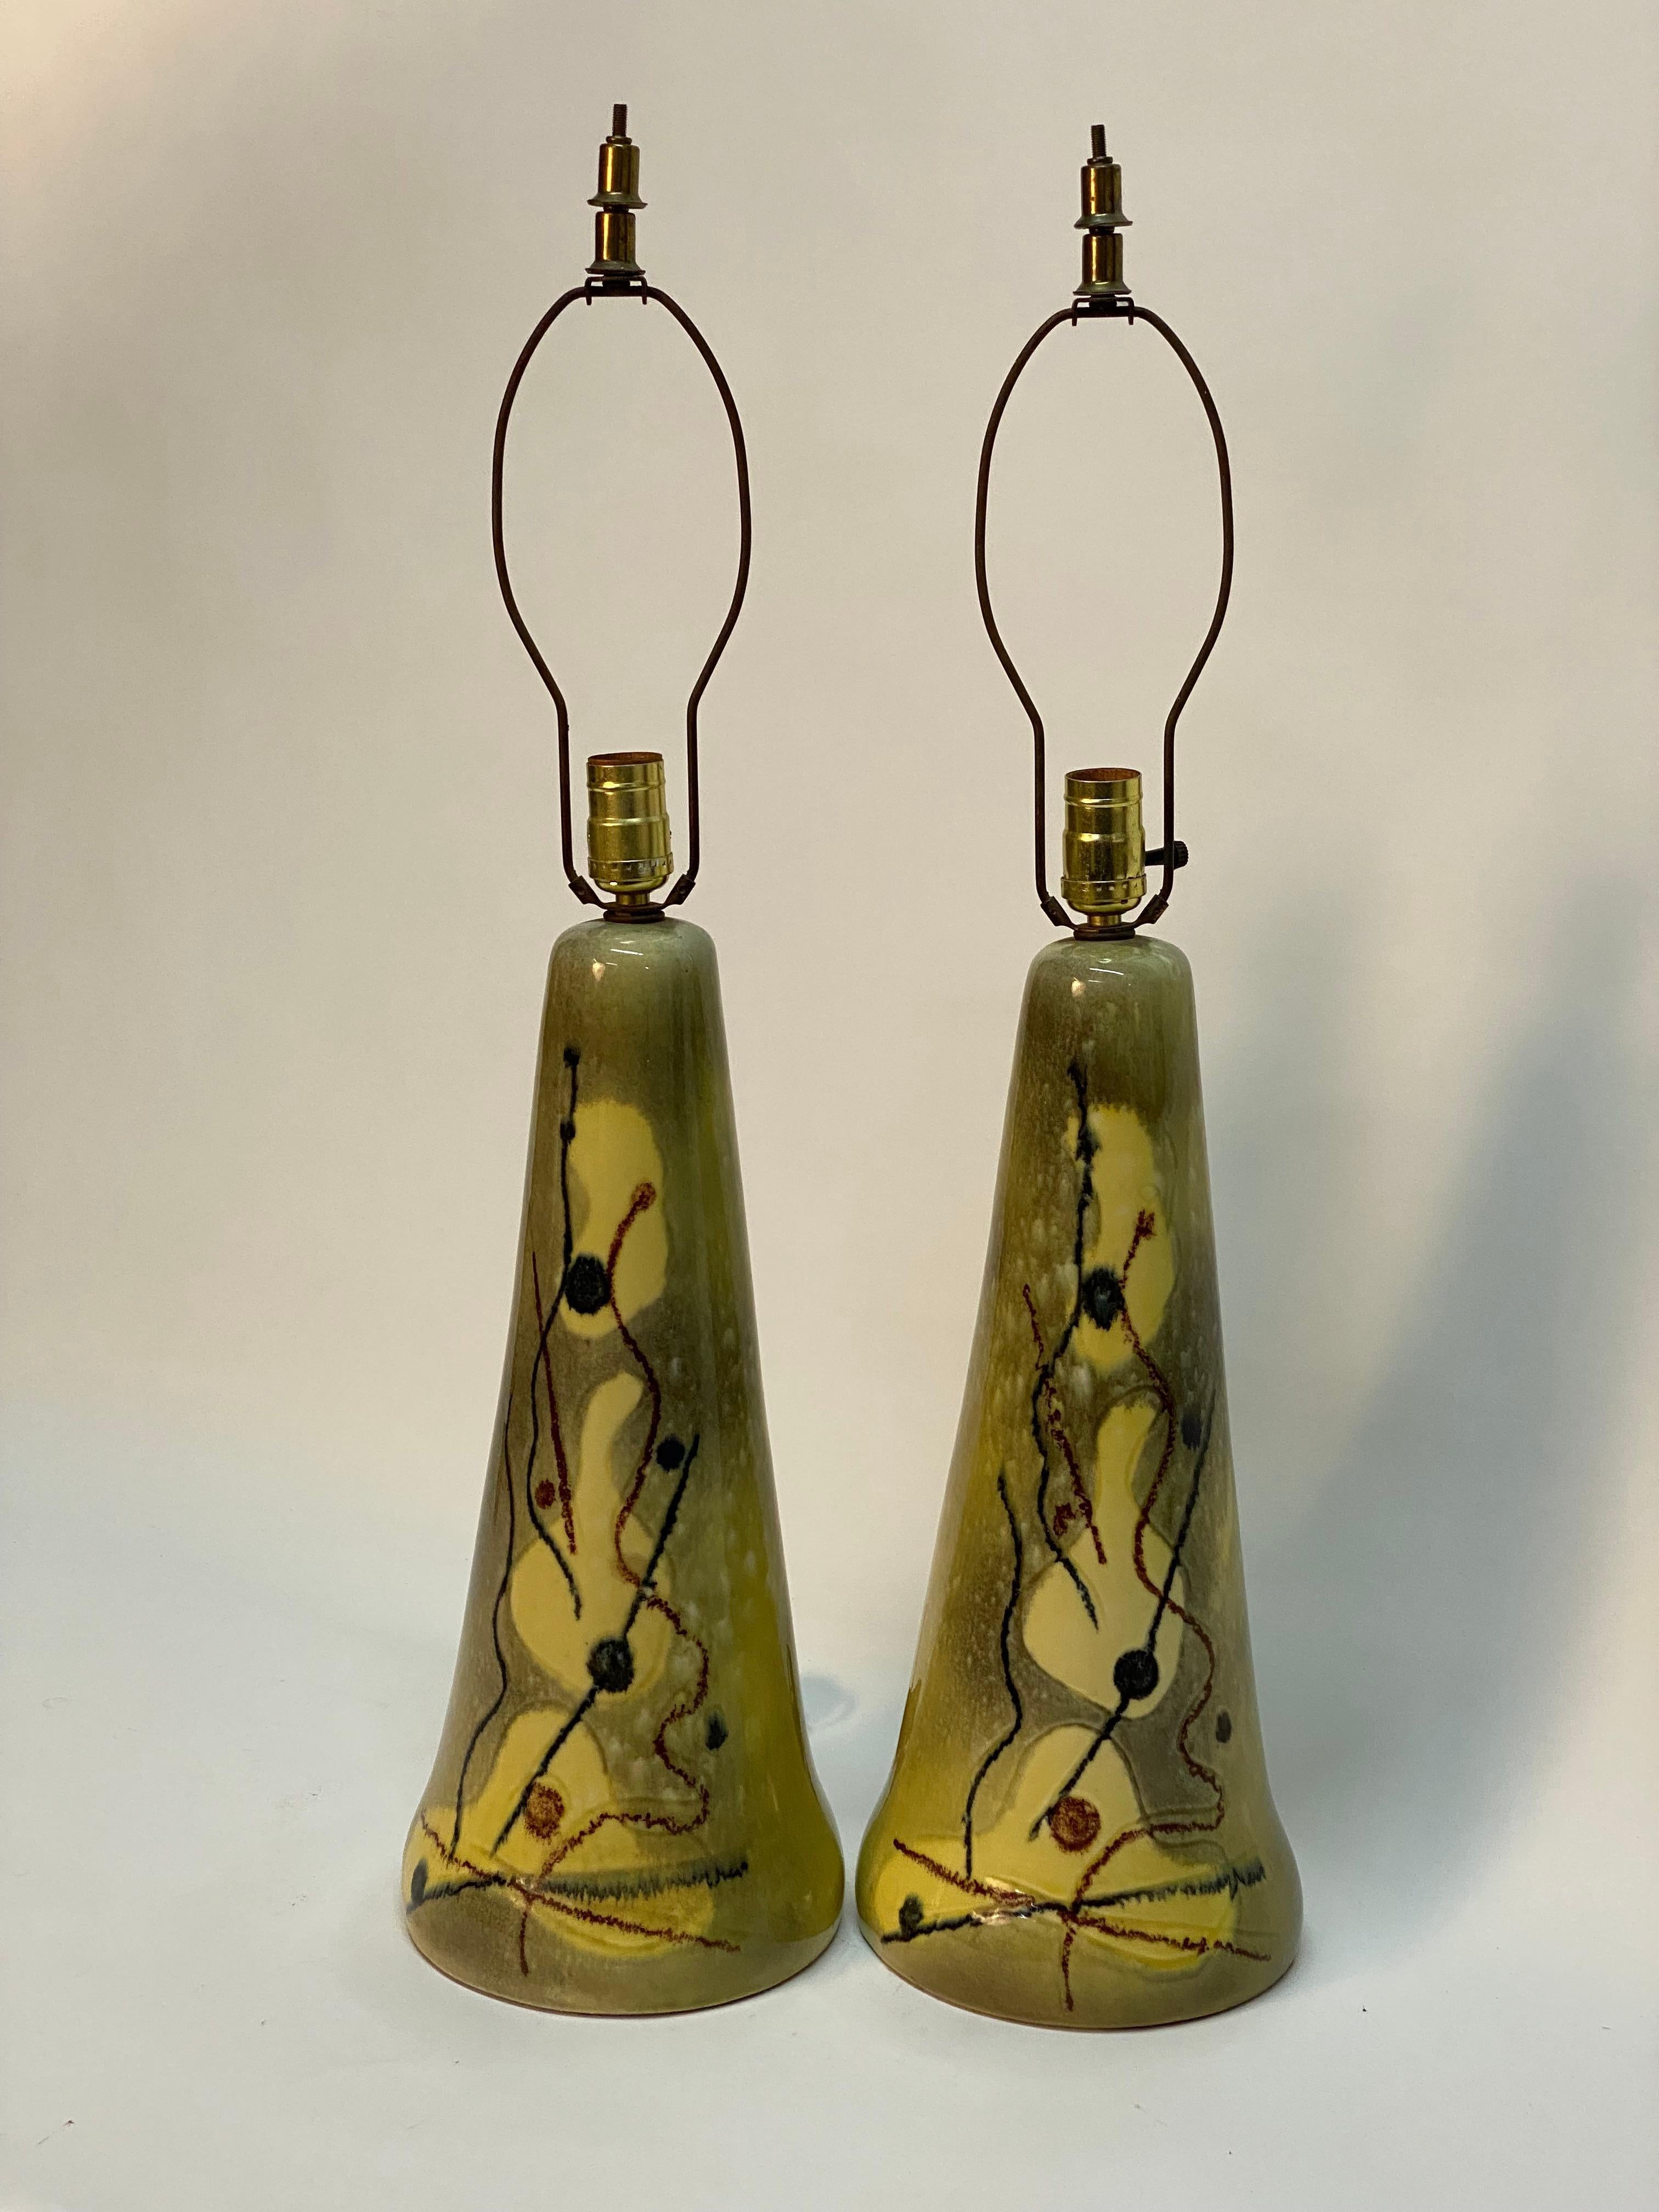 A smart looking pair of abstract decorated 1950s ceramic table lamps in the manner of Yasha Heifetz or Marianna Von Allesch. High gloss chartreuse glaze with a biomorphic abstract motif on a tapered cone shaped ceramic body. Original working wiring.